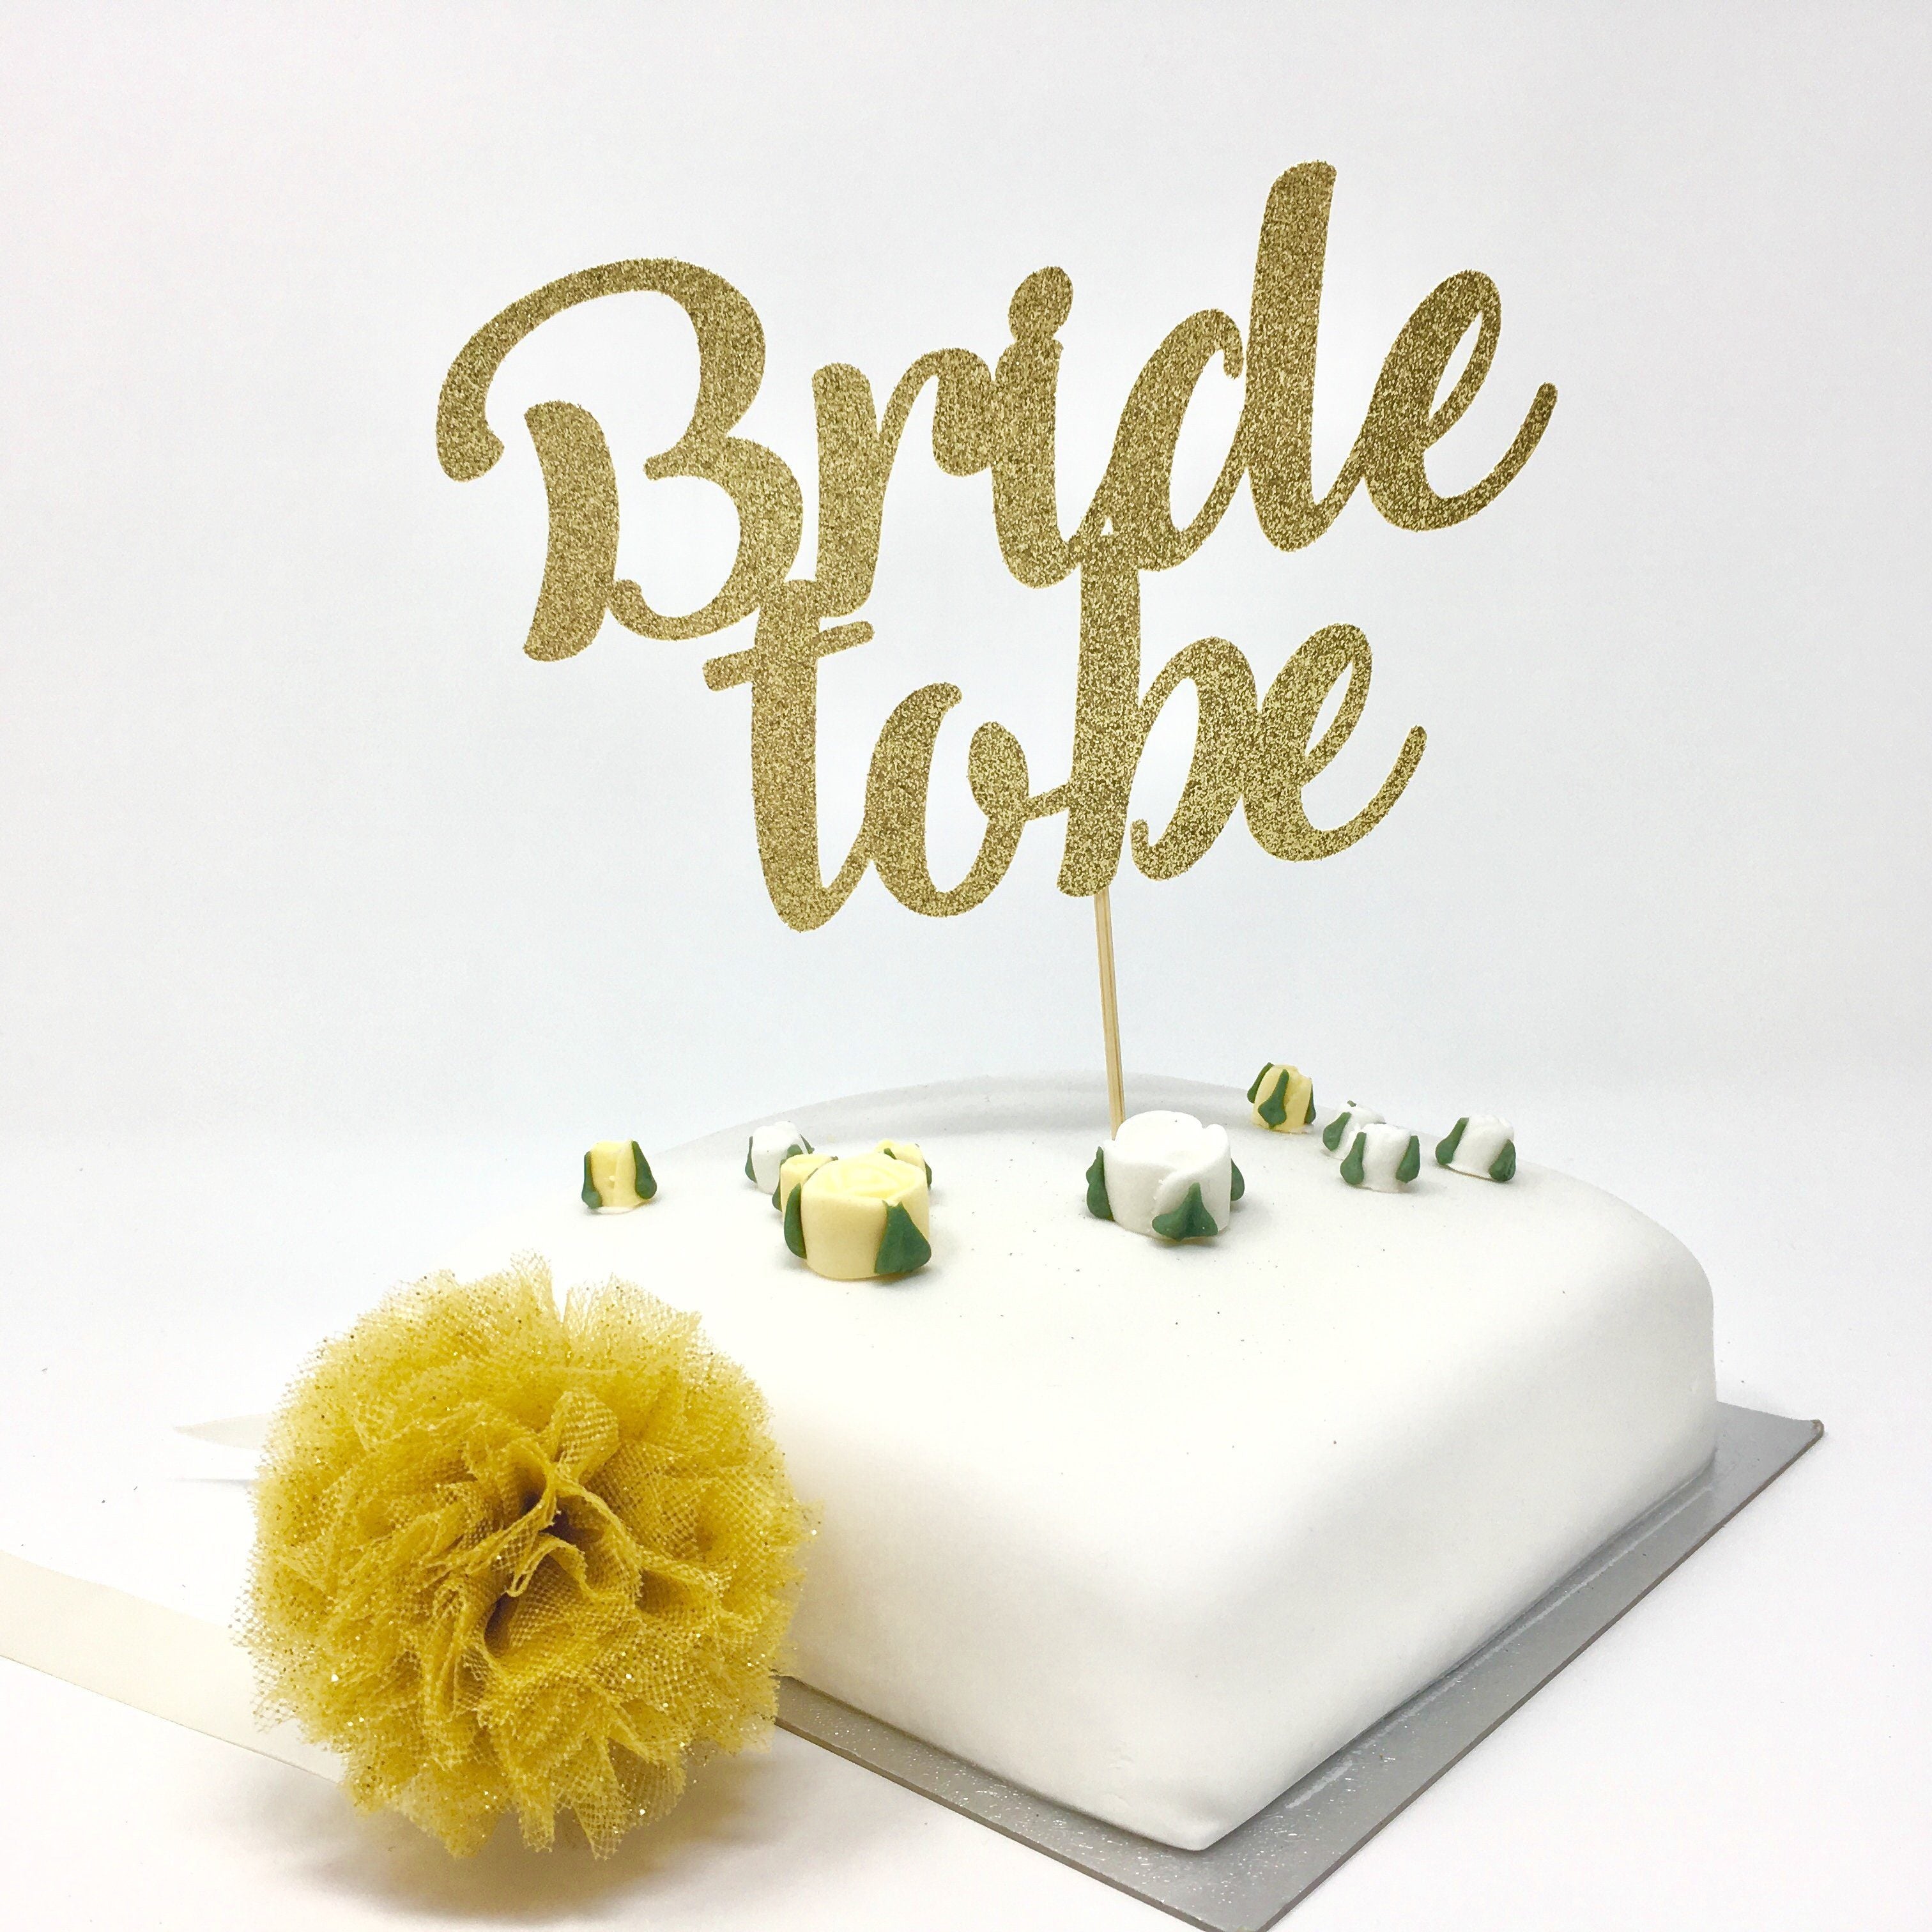 Bride To Be Cake Topper. Bridal Shower